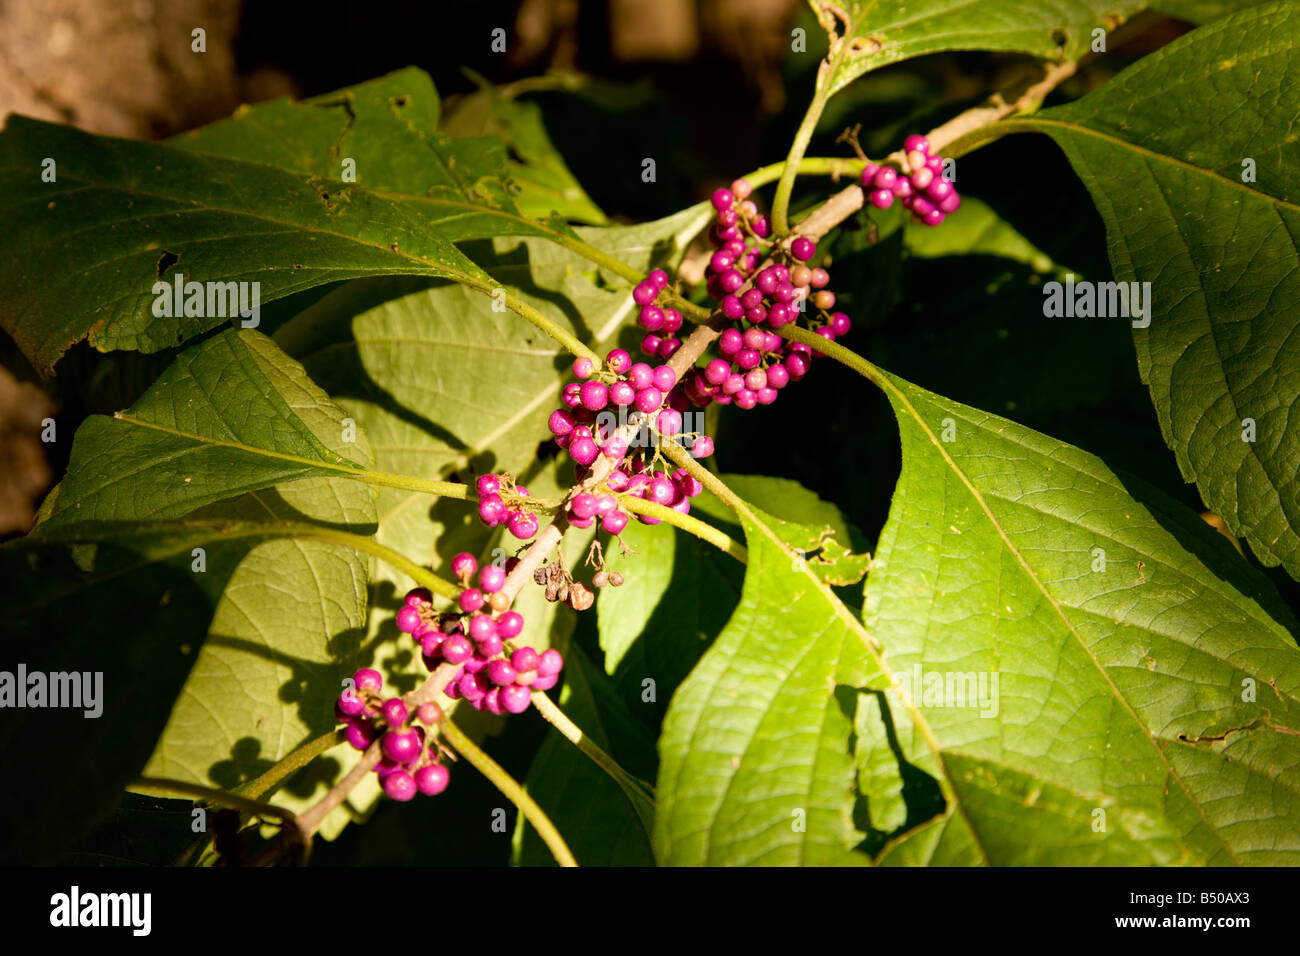 Beautyberry (Callicarpa americana) is part of a genus of shrubs and small trees in the family Verbenaceae. Stock Photo